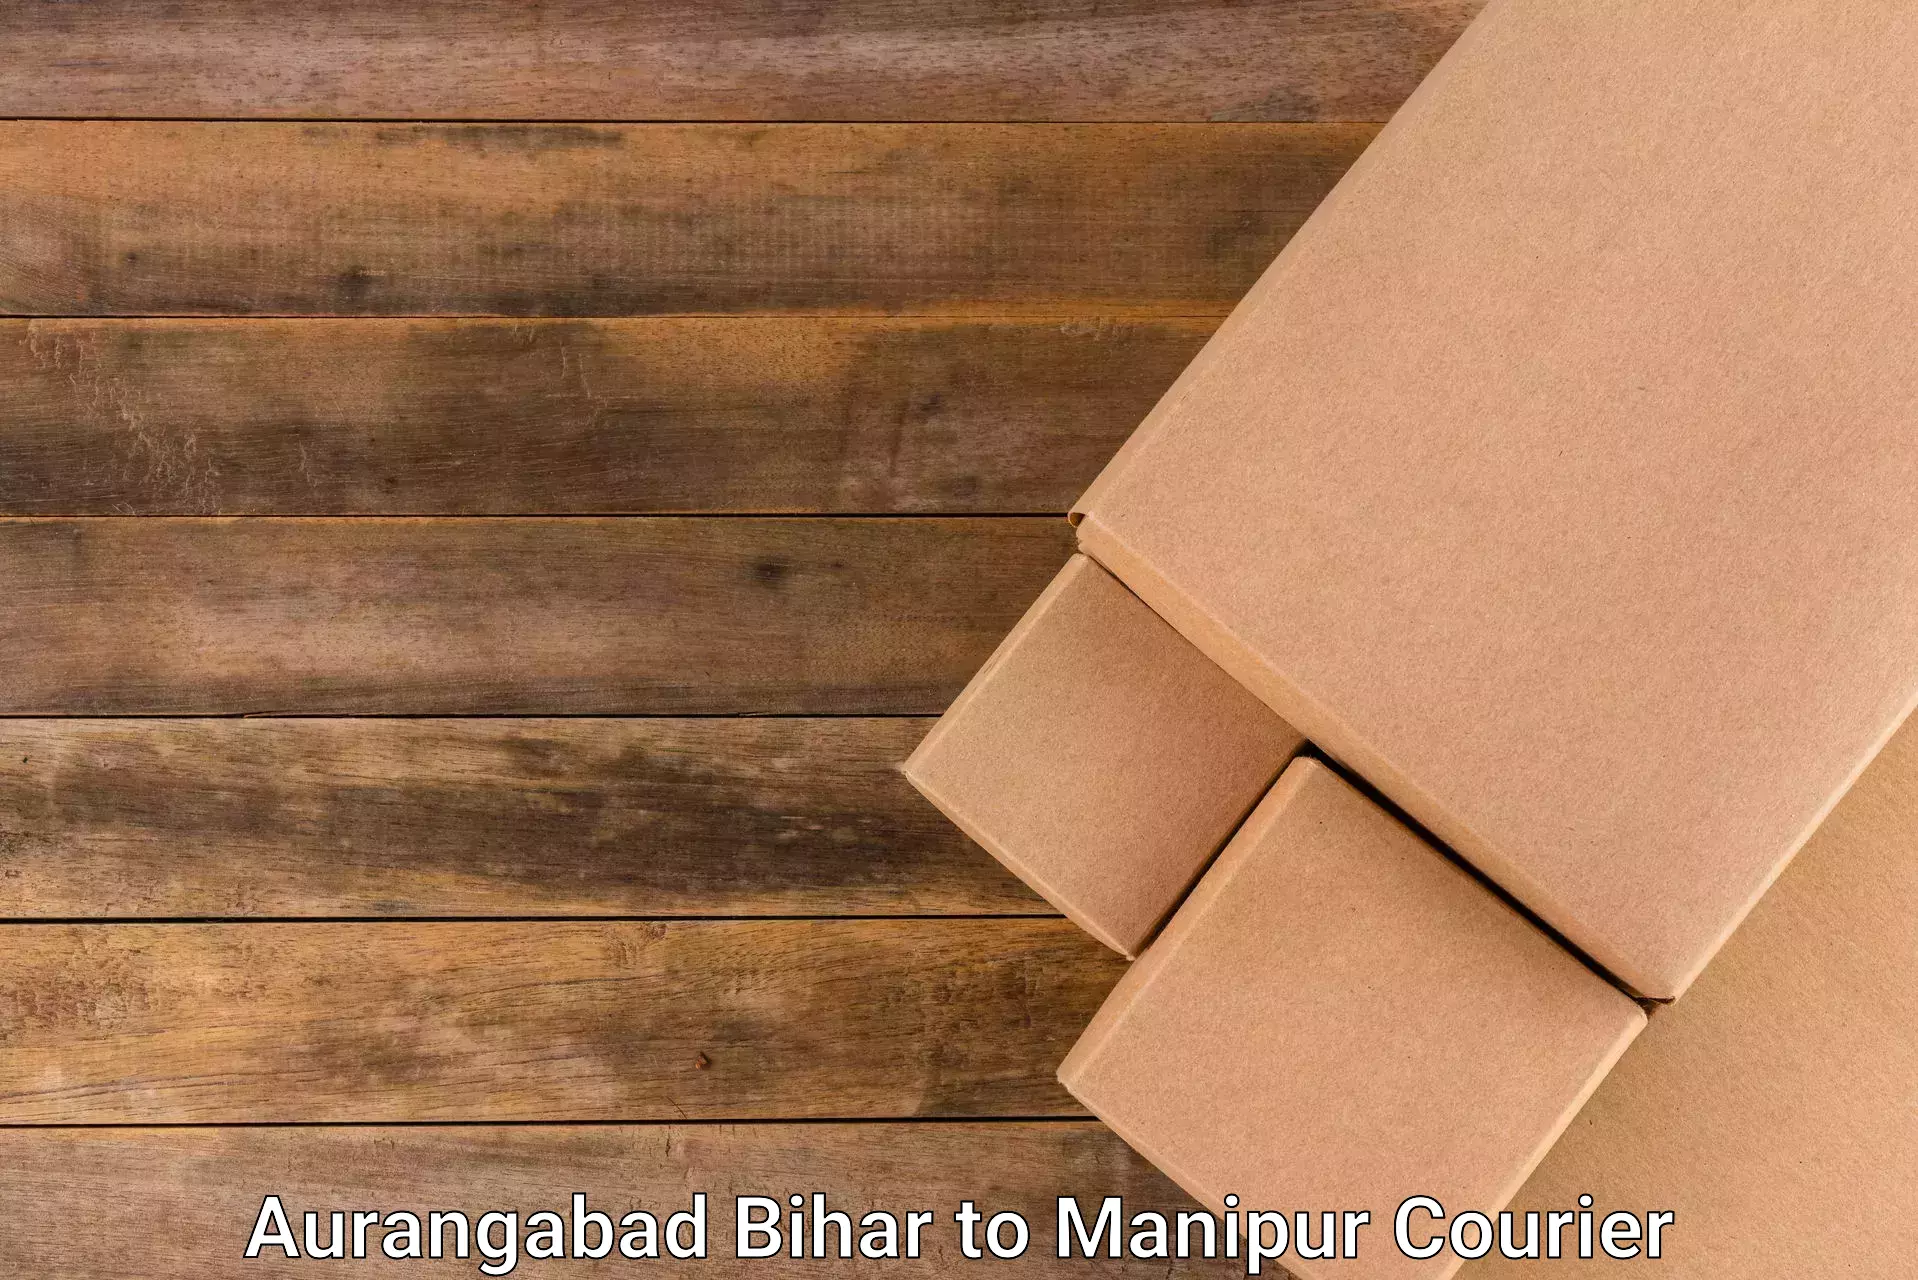 Sustainable shipping practices Aurangabad Bihar to Imphal